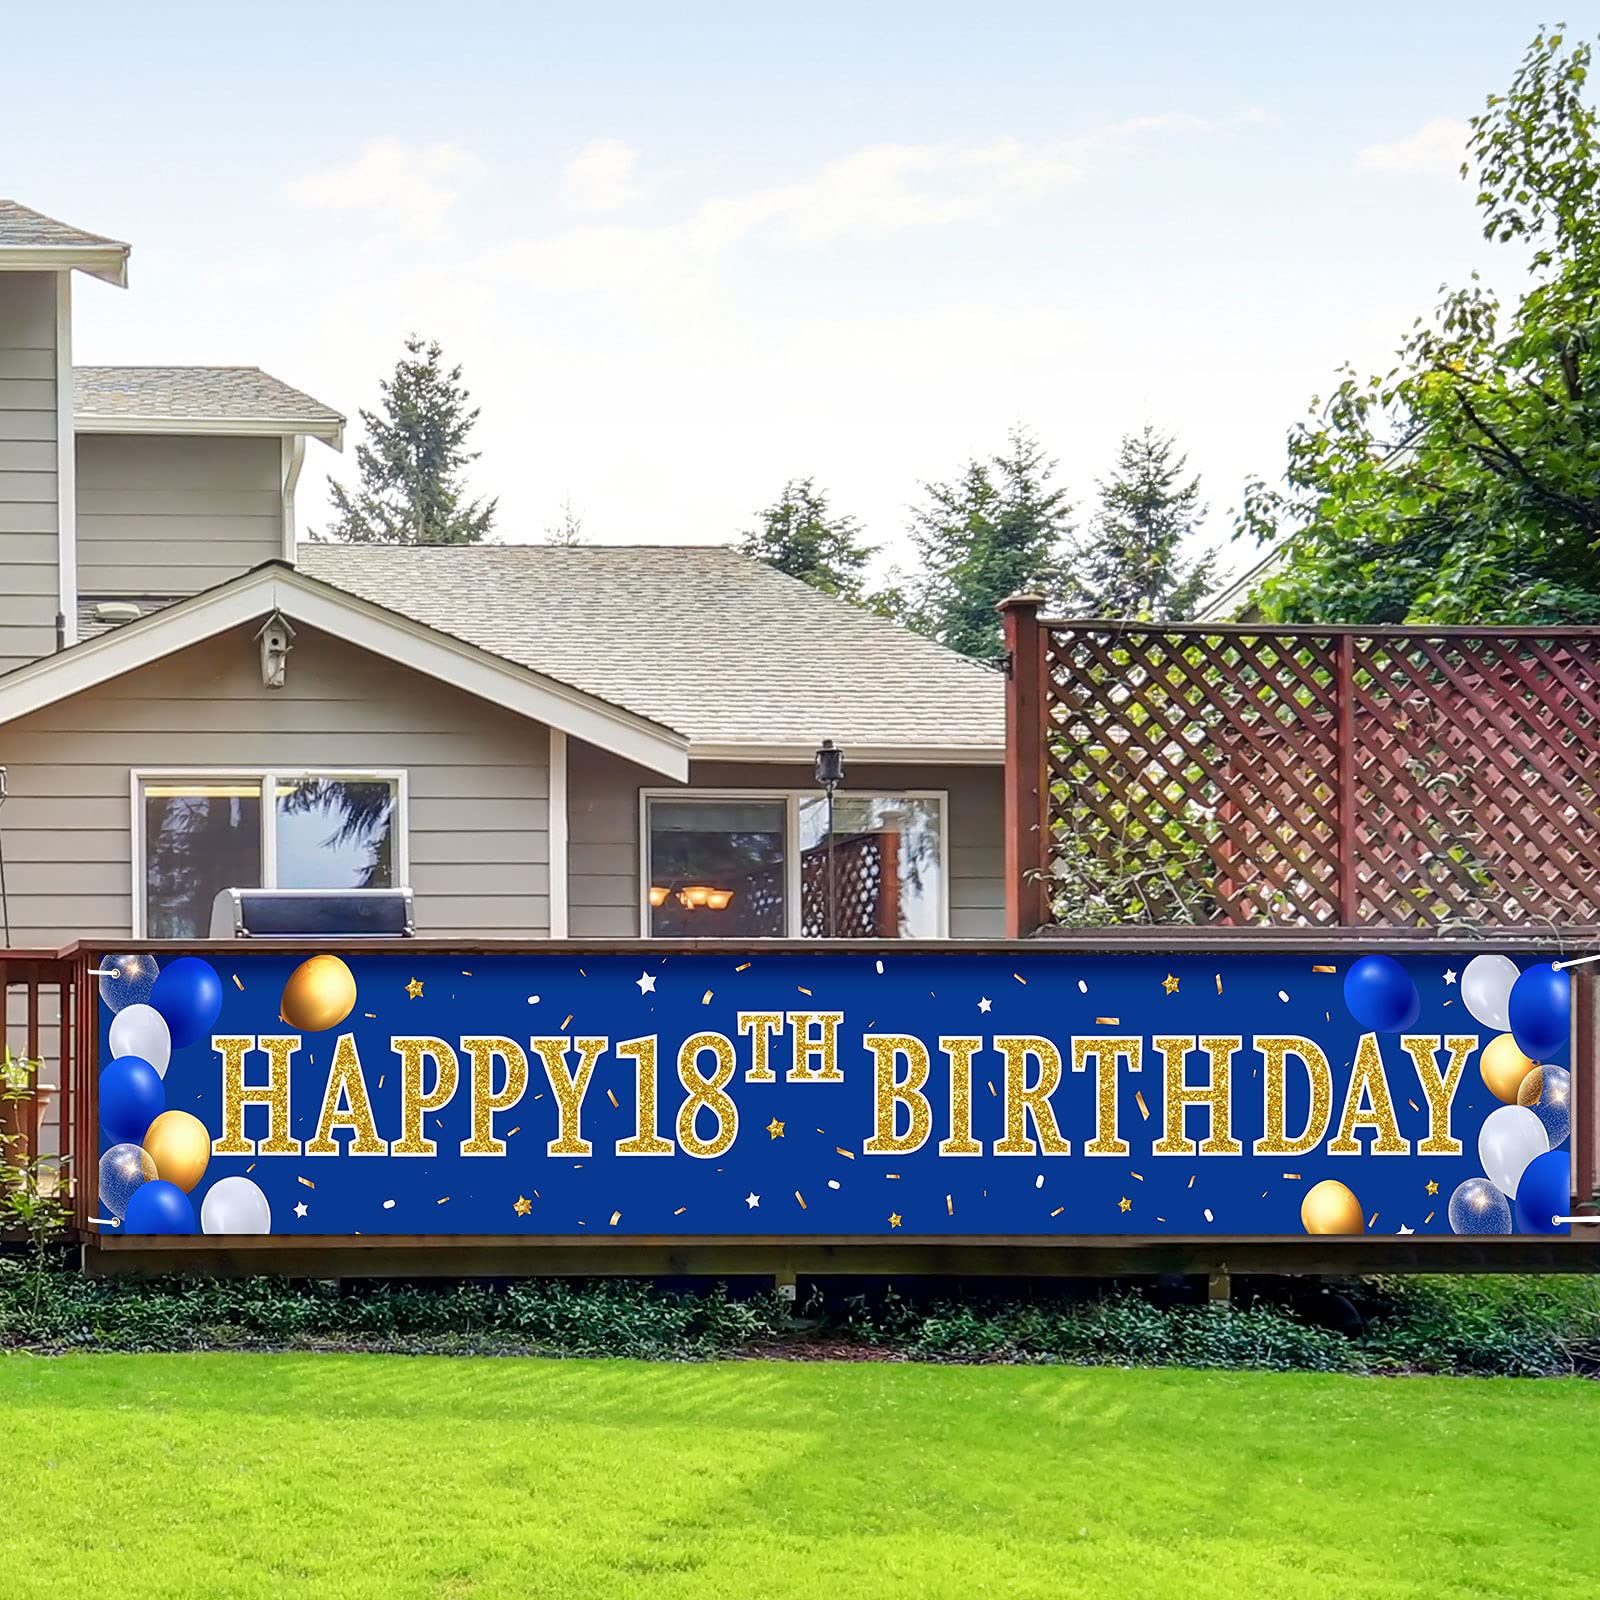 Boao 16th 18th 50th Birthday Decorations for Boys, Navy Blue and Gold Birthday Banner Yard Backdrop, Happy Birthday Party Supplies Decorations for Men (18th)